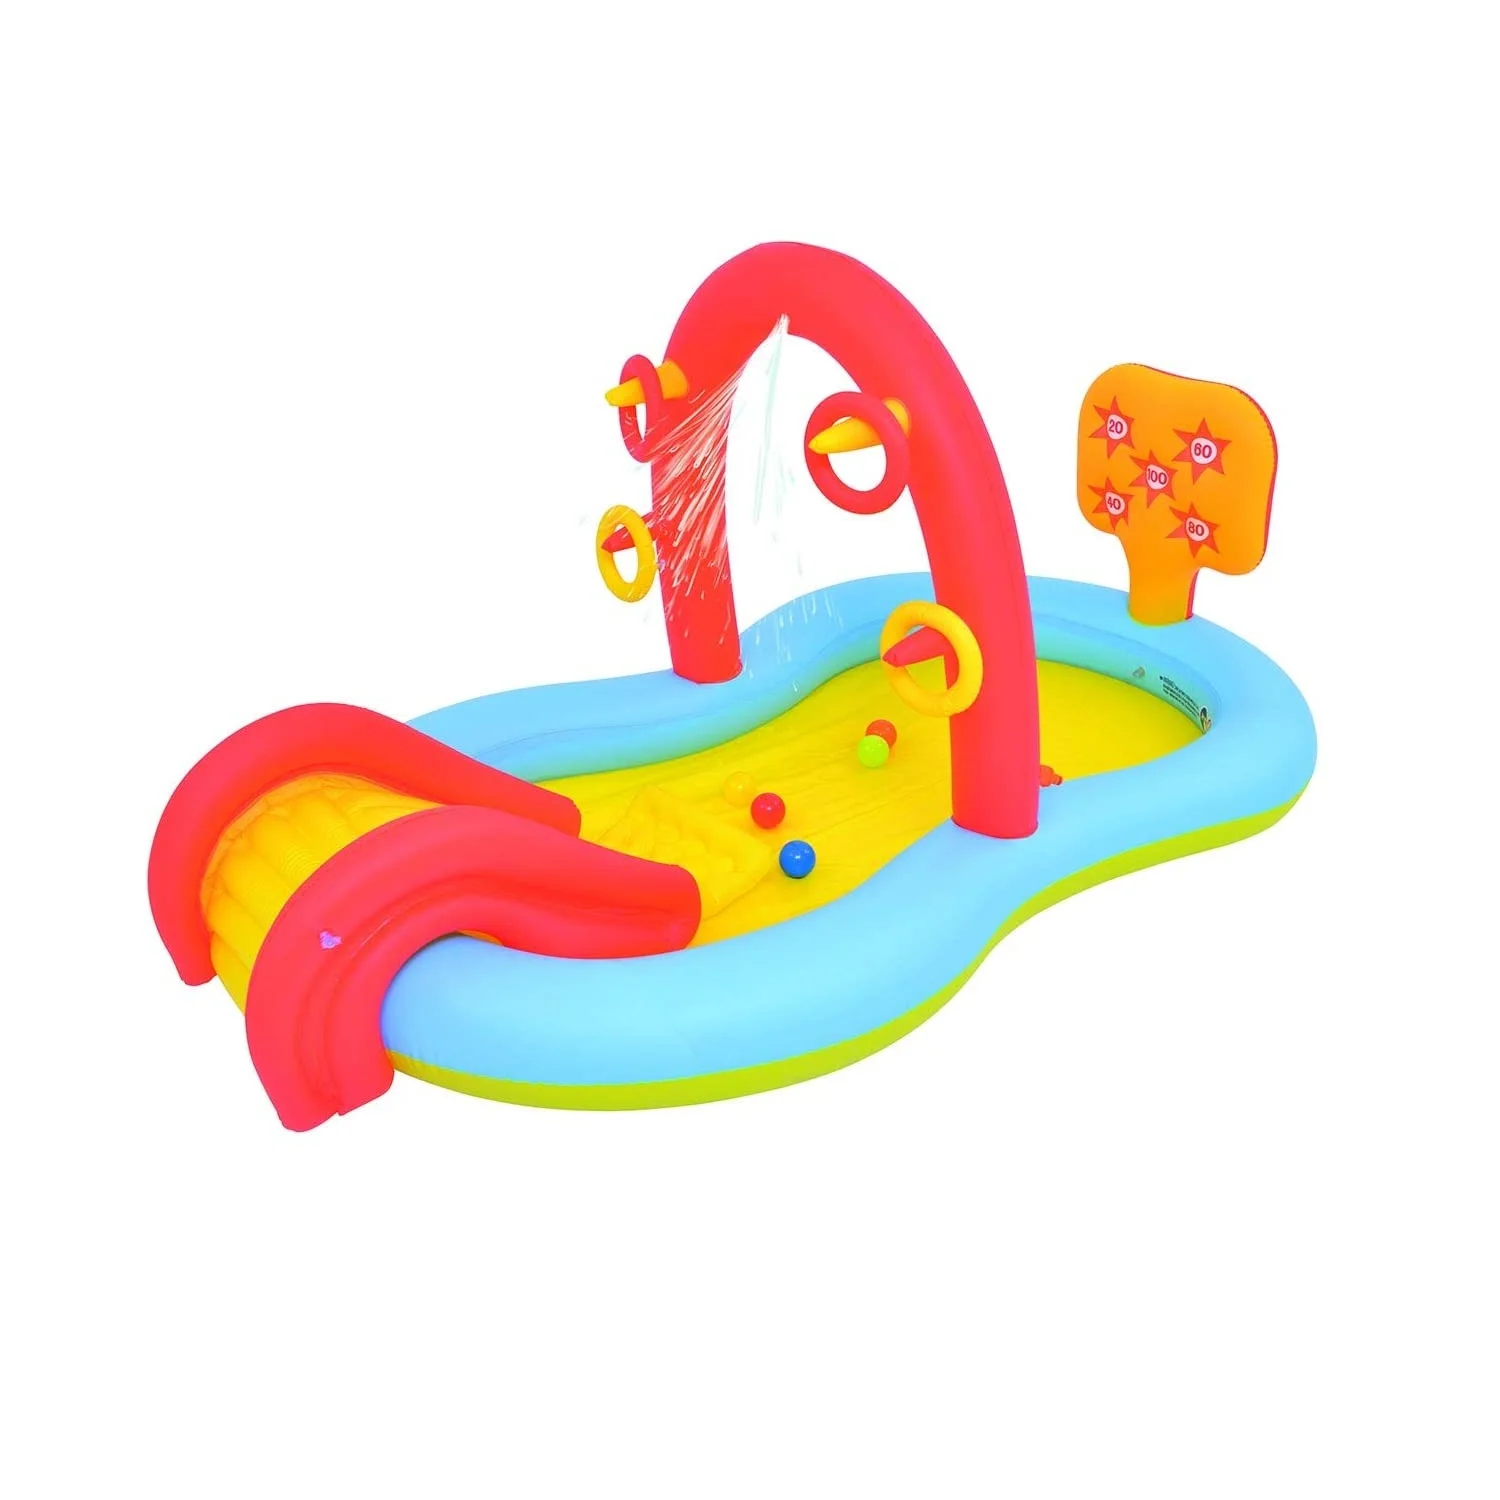 Sliding Play Pool for Kids Age 3+, Multi-Functions of Slide, Spray Water, Toss Ring and Ball 88.5 x 49 x 41inch